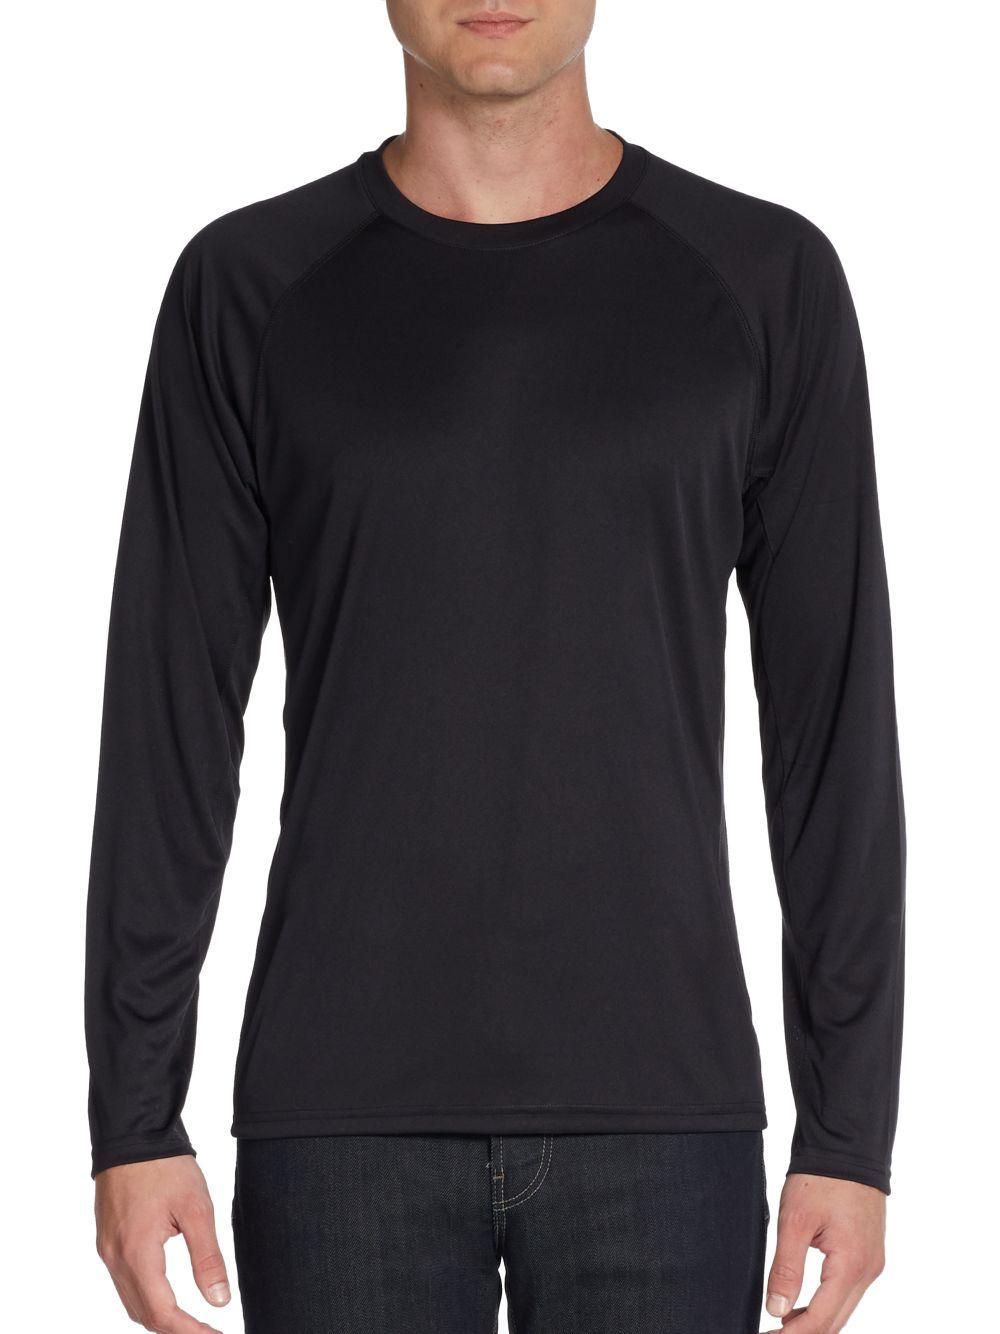 Fila Synthetic Serve Long-sleeve Performance Tee in Black for Men - Lyst